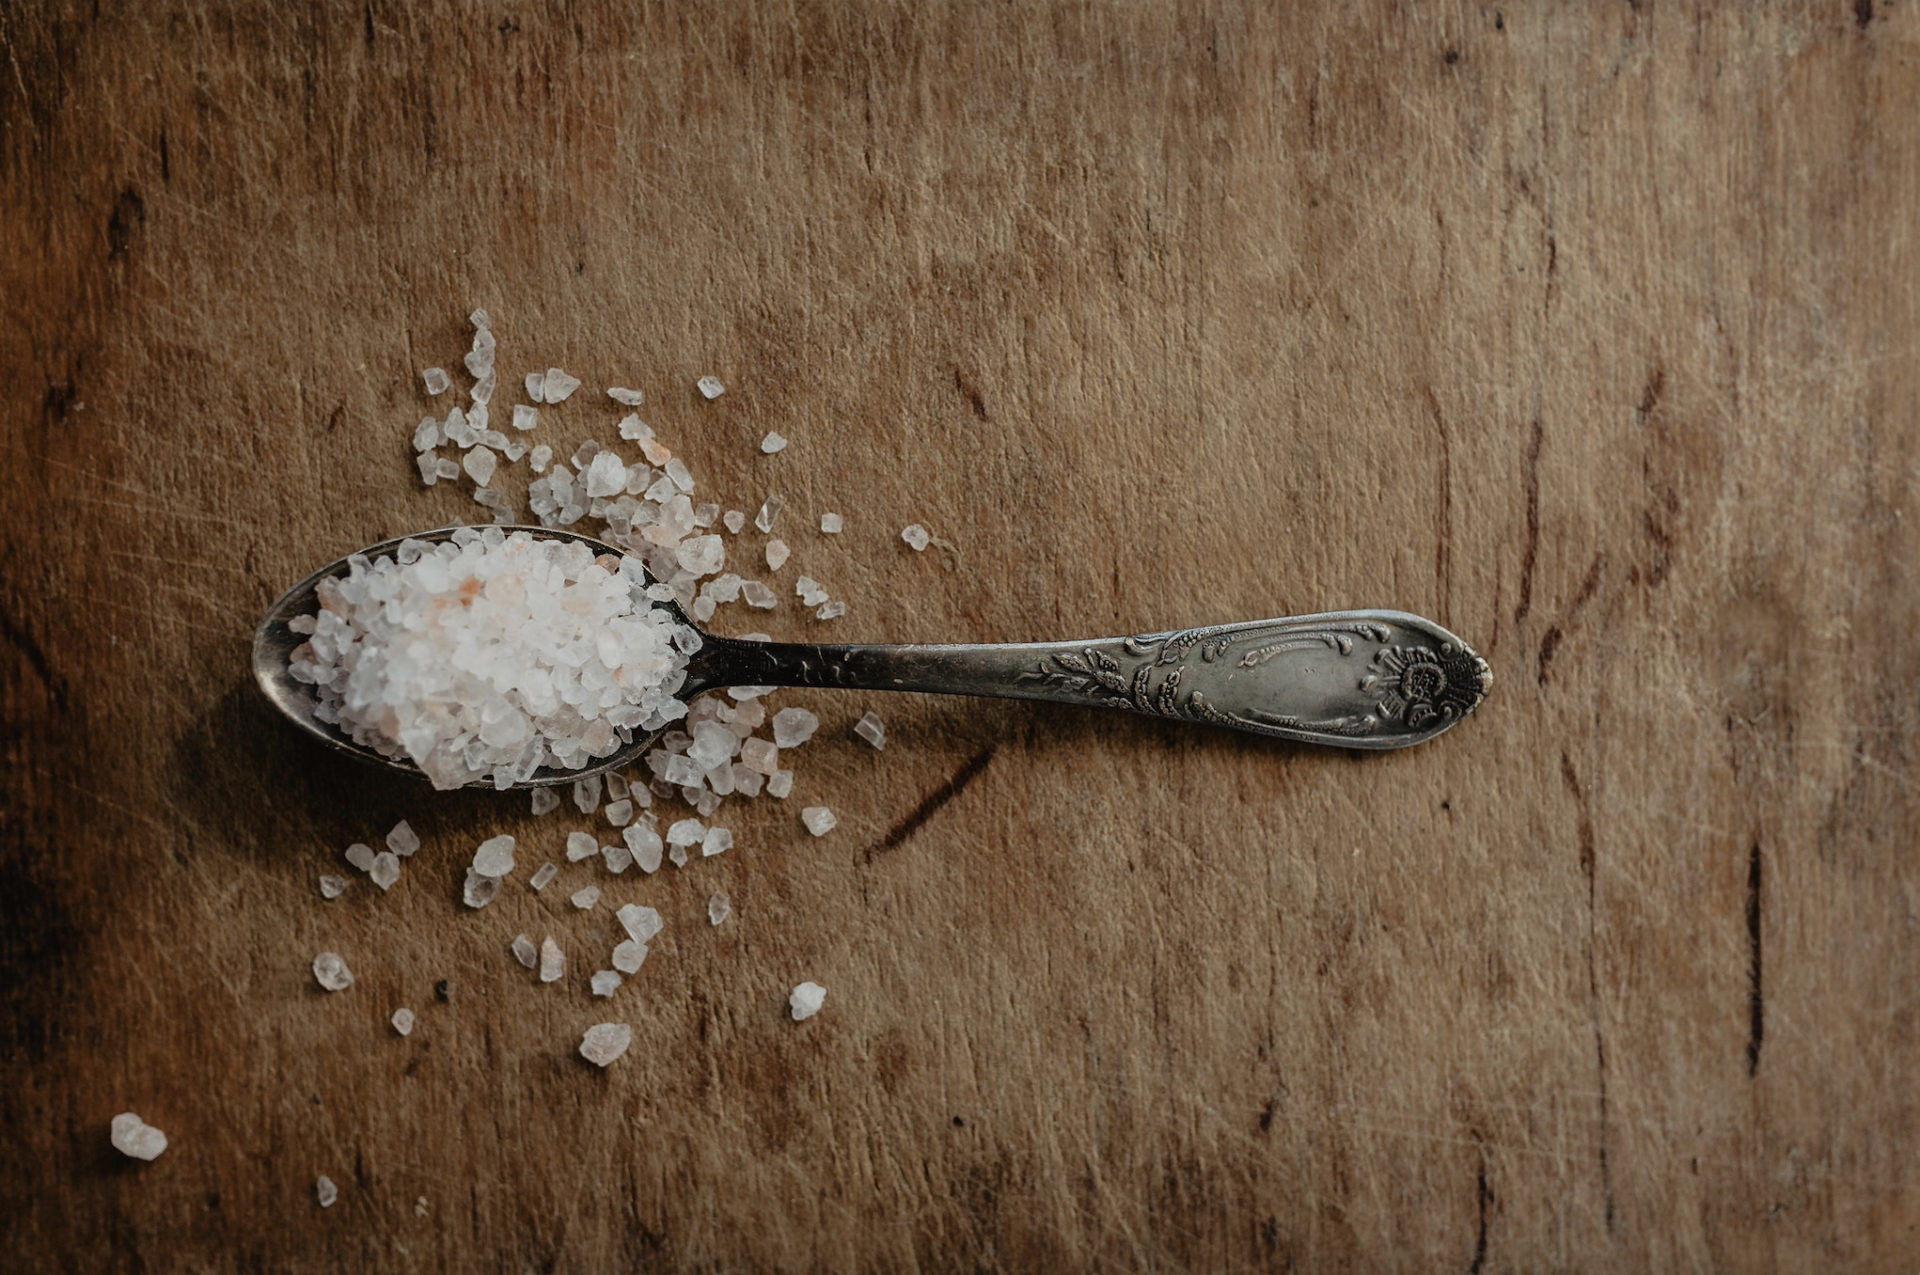 Picture of a spoon full of salt.